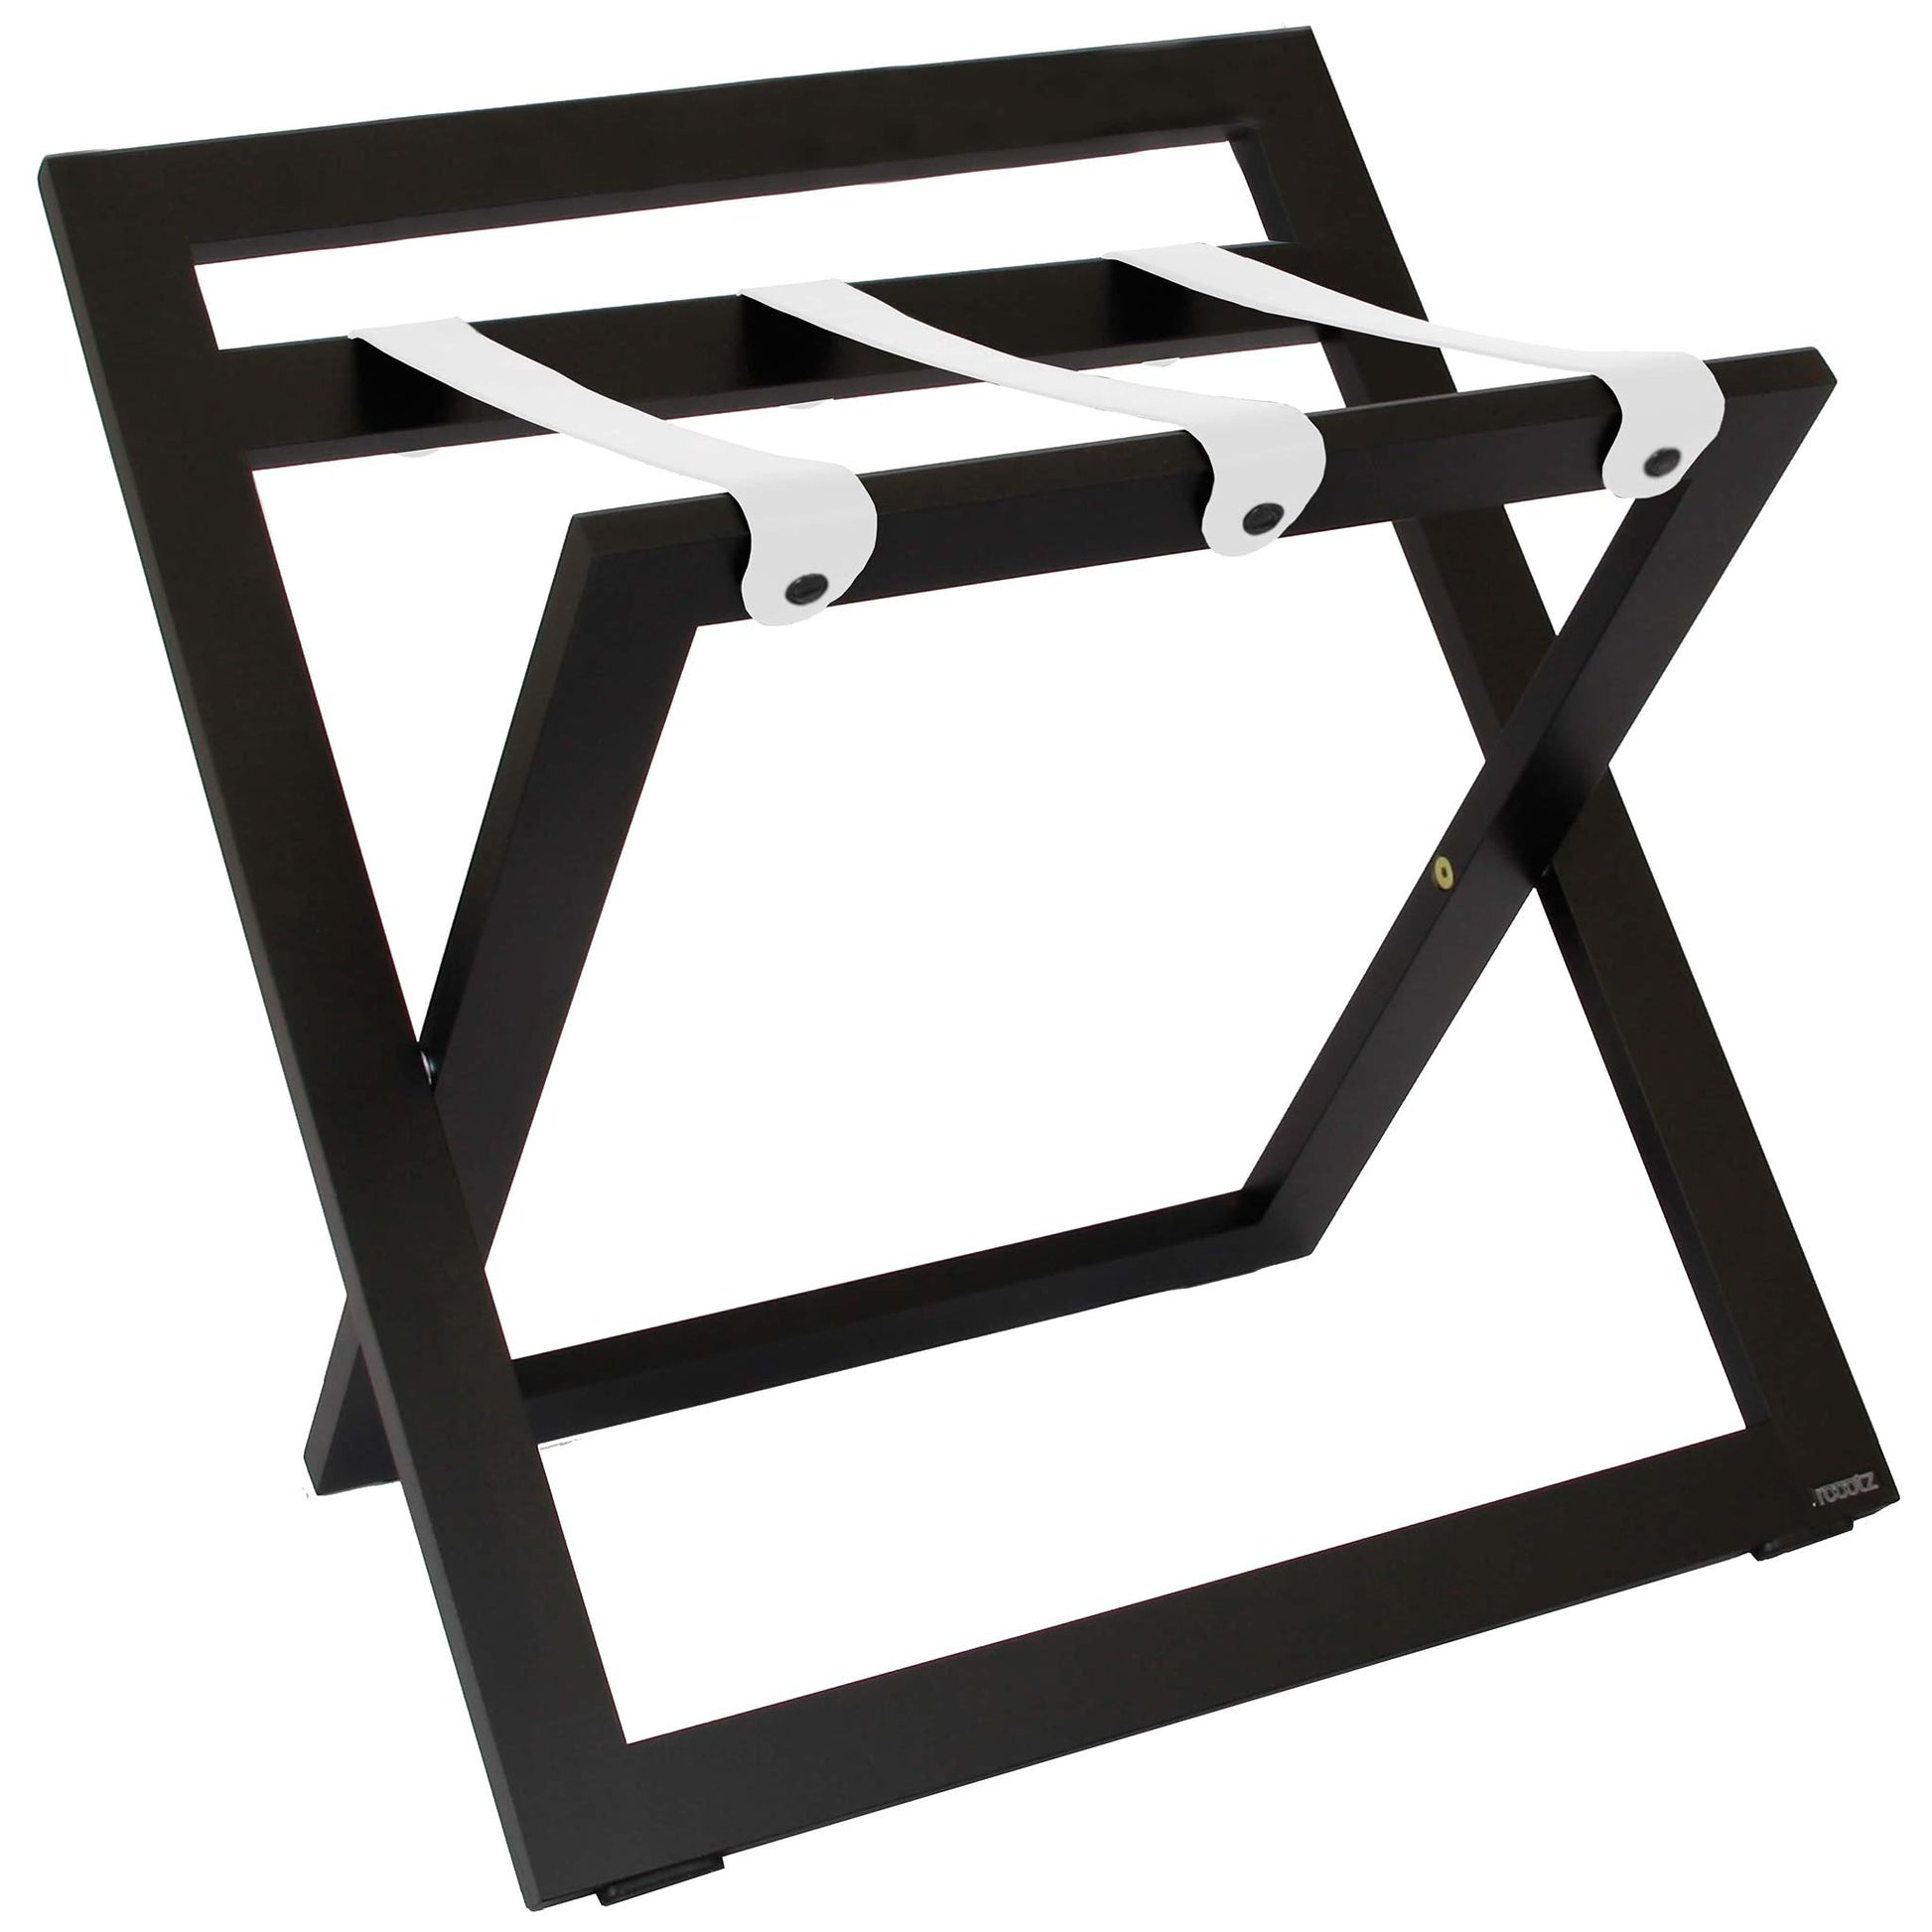 Roootz compact black wooden hotel luggage rack with white leather straps and backstand